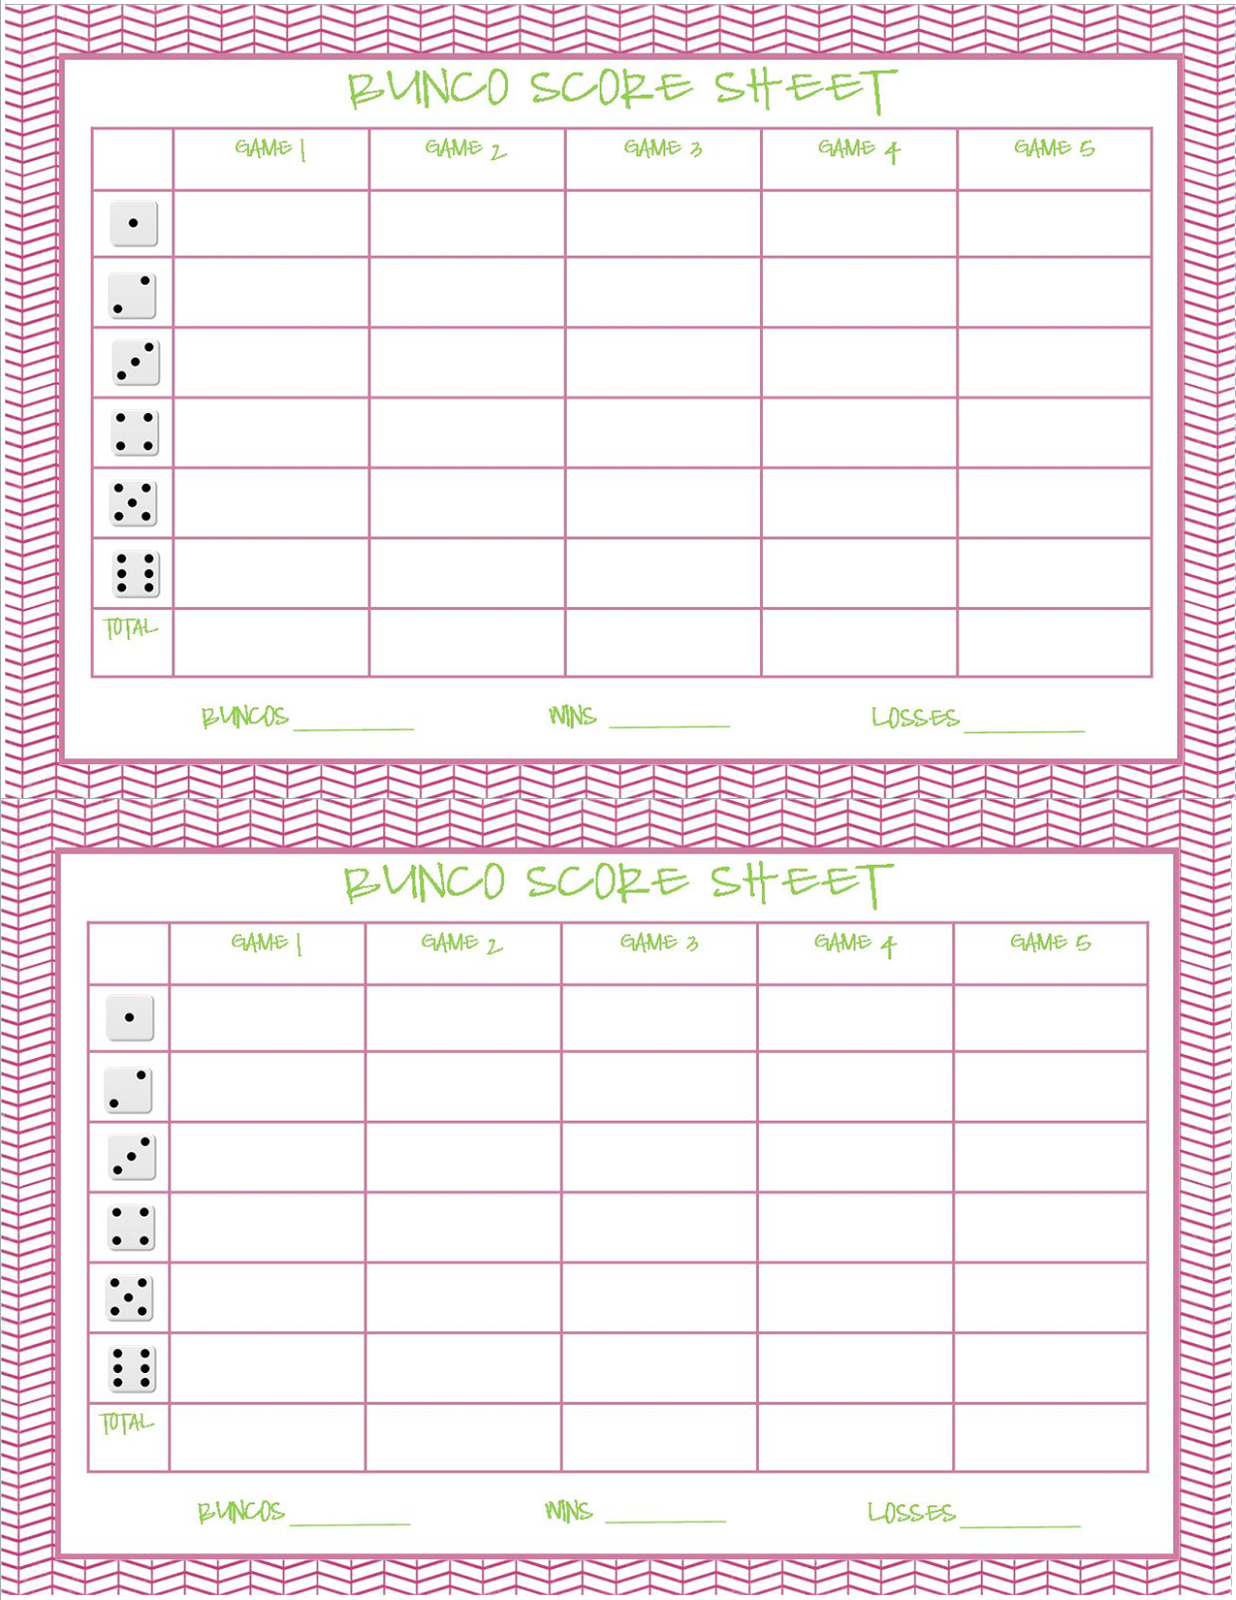 Free Printable Bunco Score Sheets Only | Feel Free To Print It Out - Printable Bunco Score Cards Free